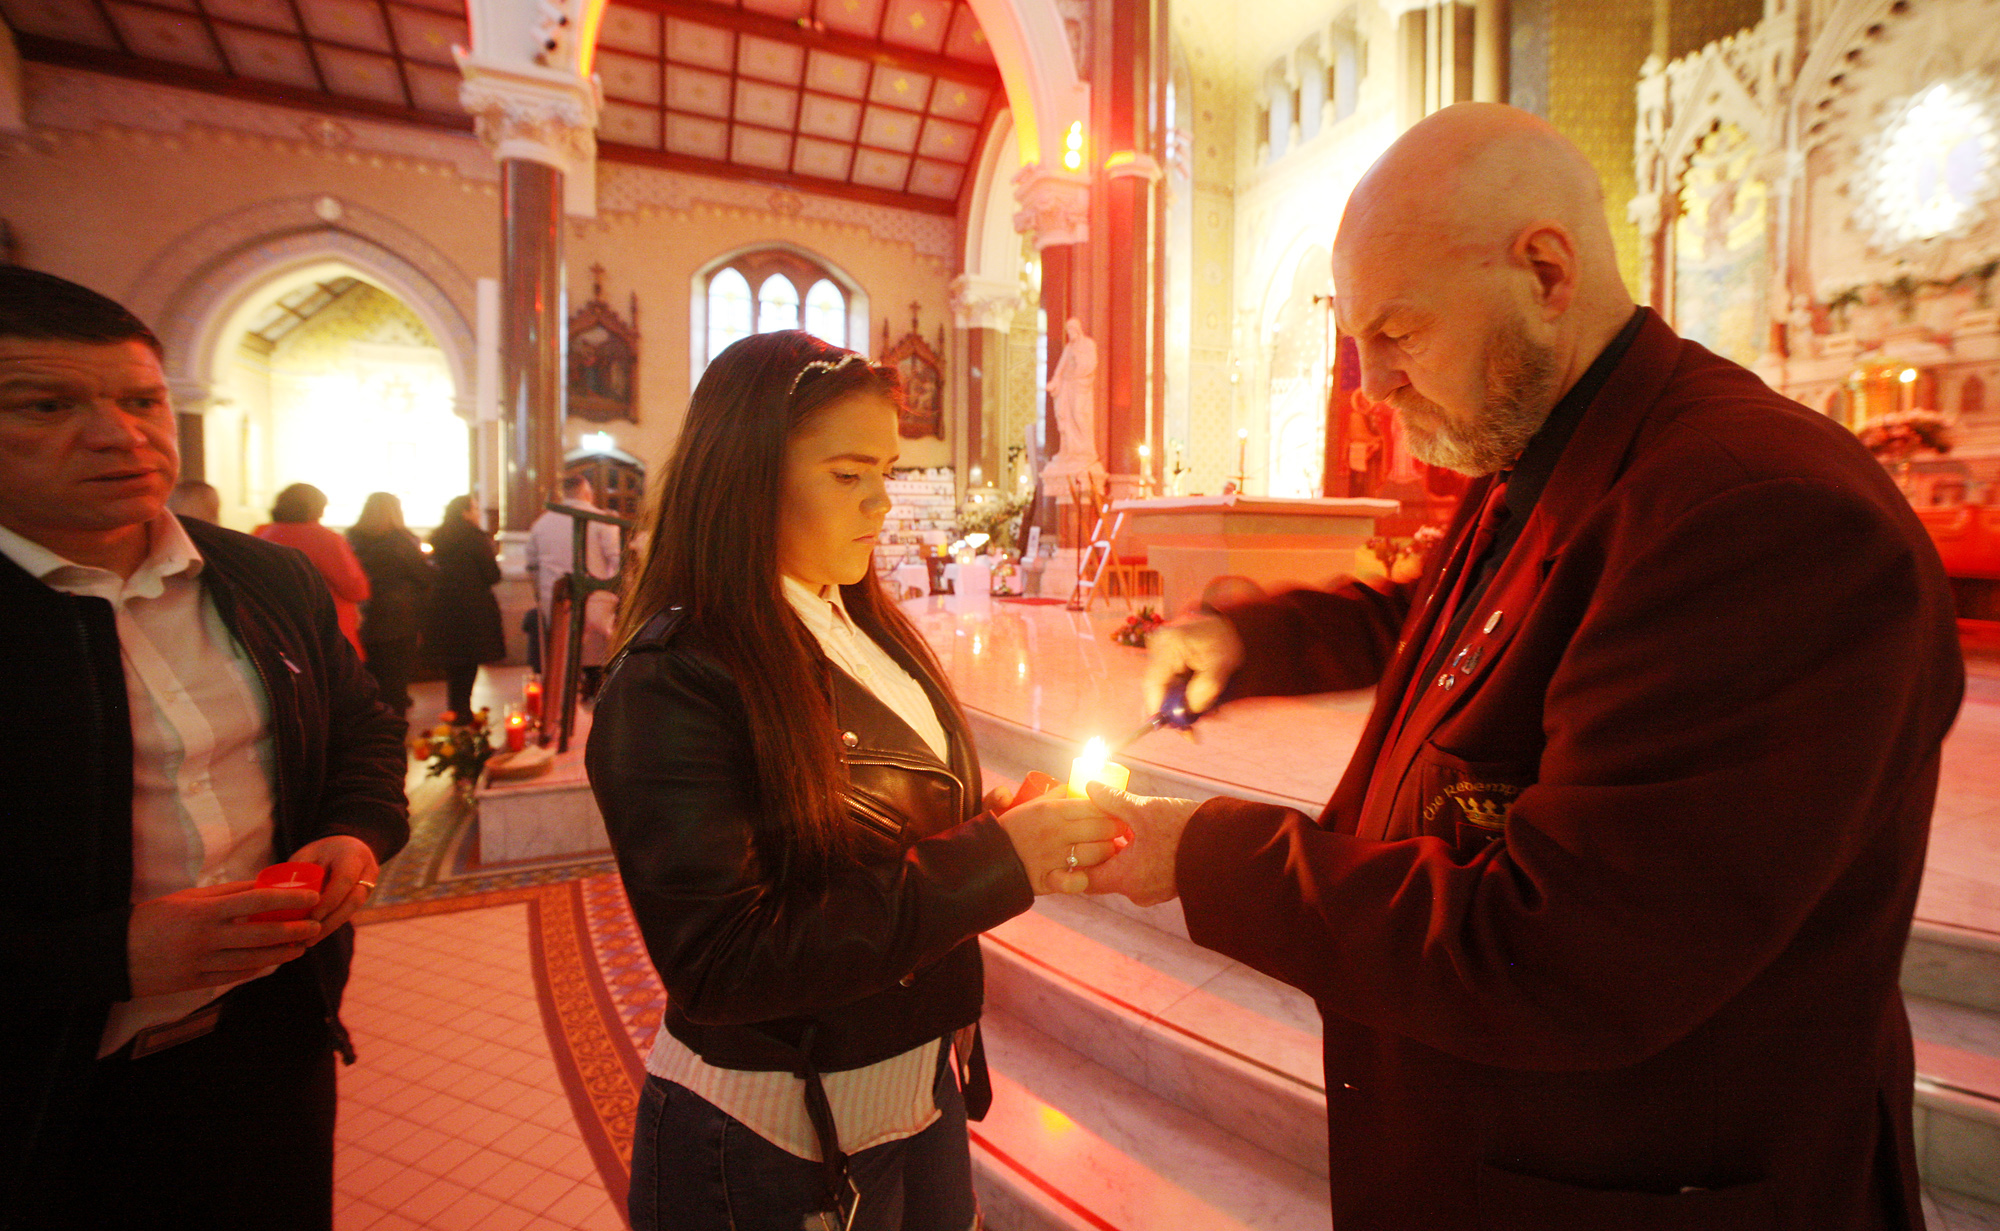 The annual Suicide Awareness Mass of Hope in Clonard Monastery